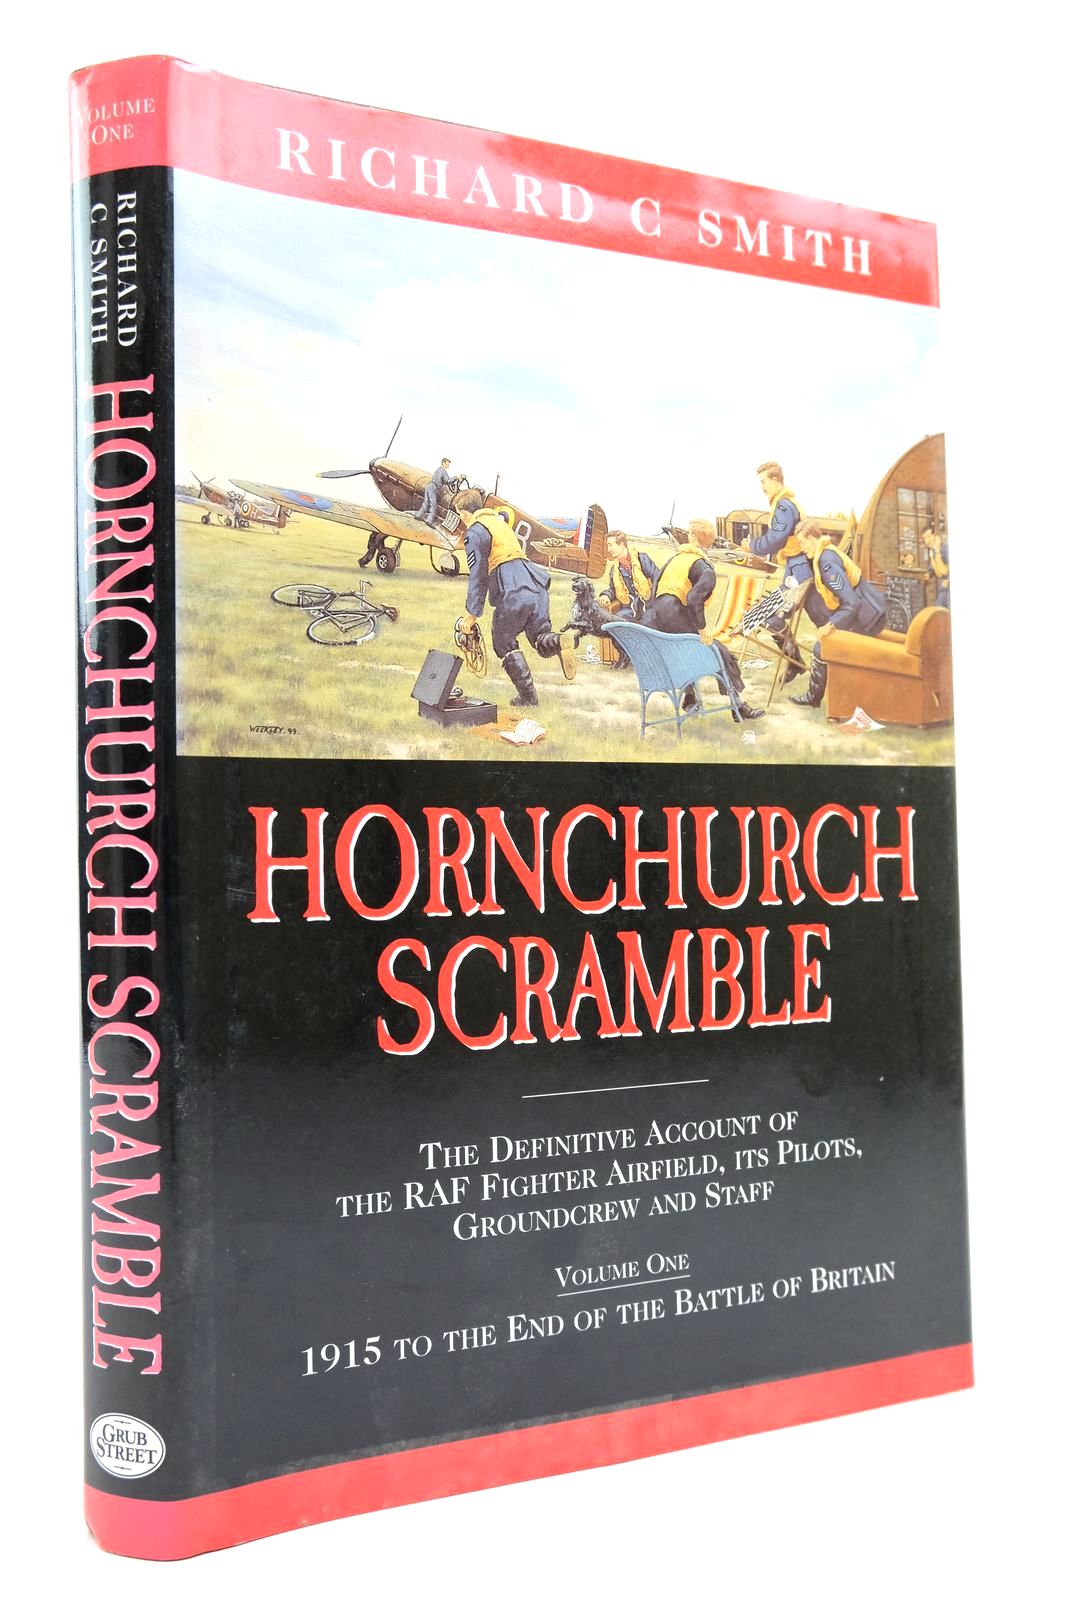 Photo of HORNCHURCH SCRAMBLE THE DEFINITIVE ACCOUNT OF THE RAF FIGHTER AIRFIELD, ITS PILOTS, GROUNDCREW AND STAFF written by Smith, Richard C. published by Grub Street (STOCK CODE: 2140053)  for sale by Stella & Rose's Books